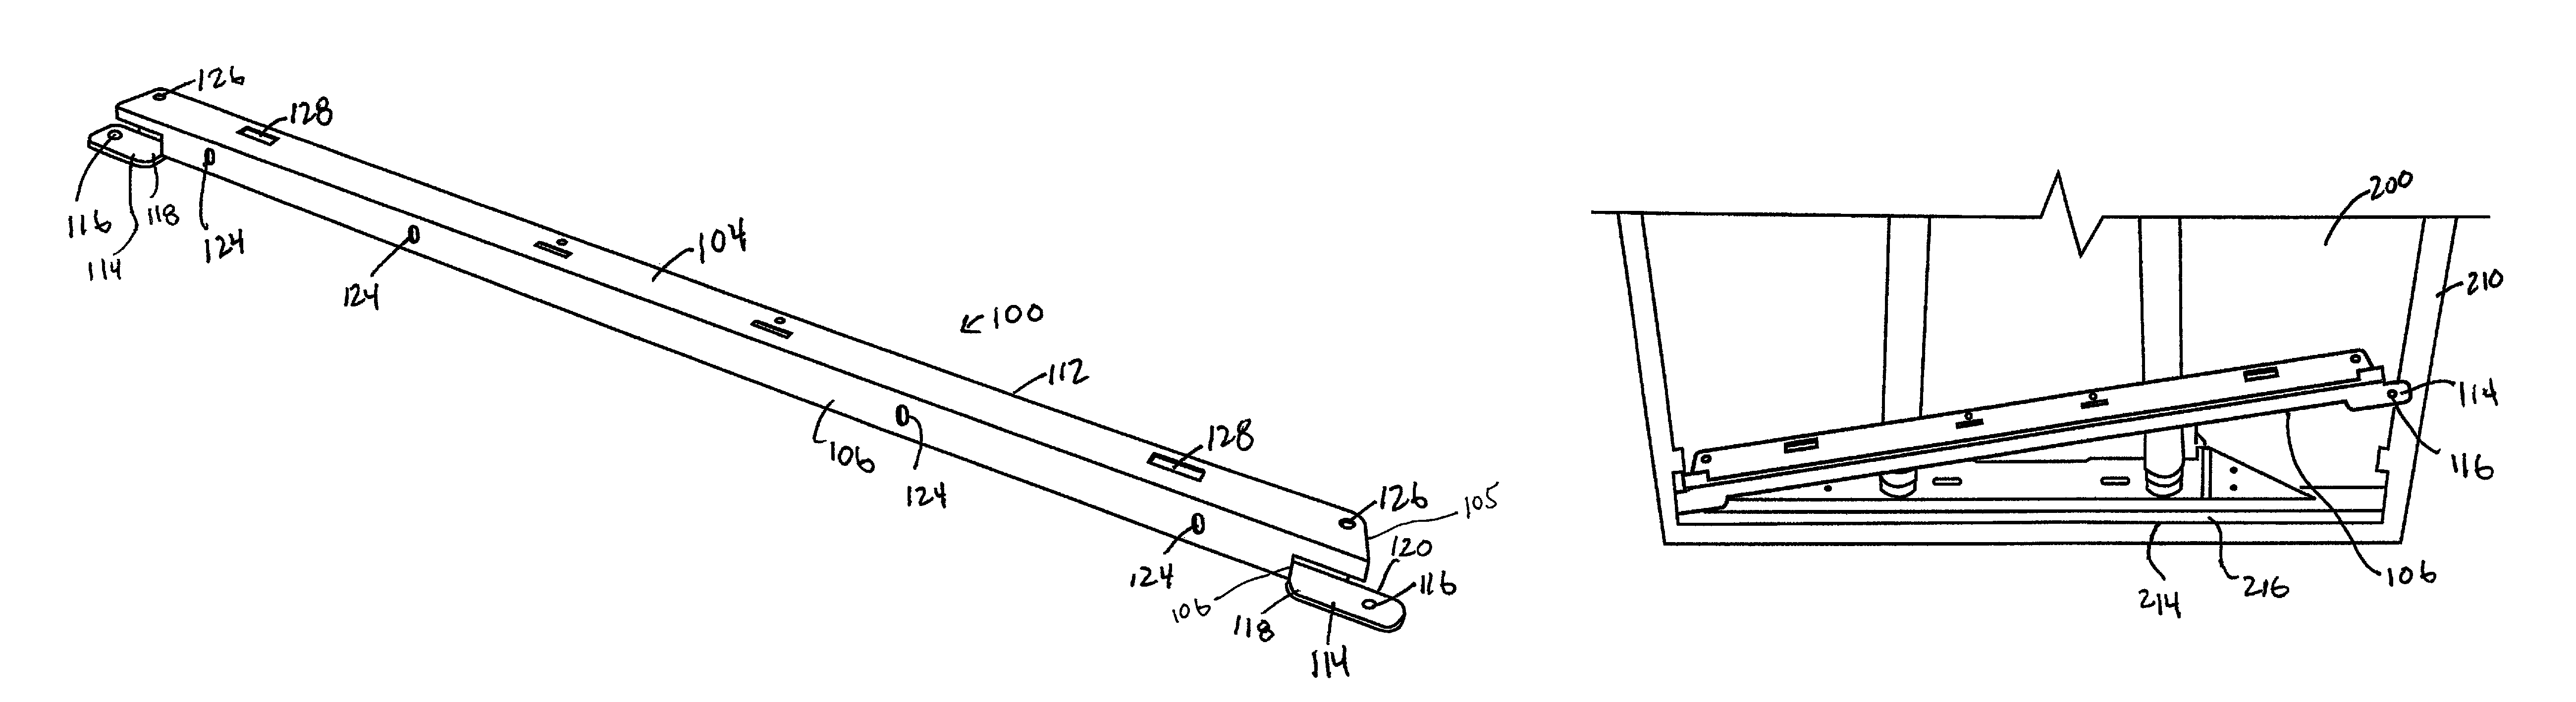 Bracket for a lighting fixture in a suspended ceiling